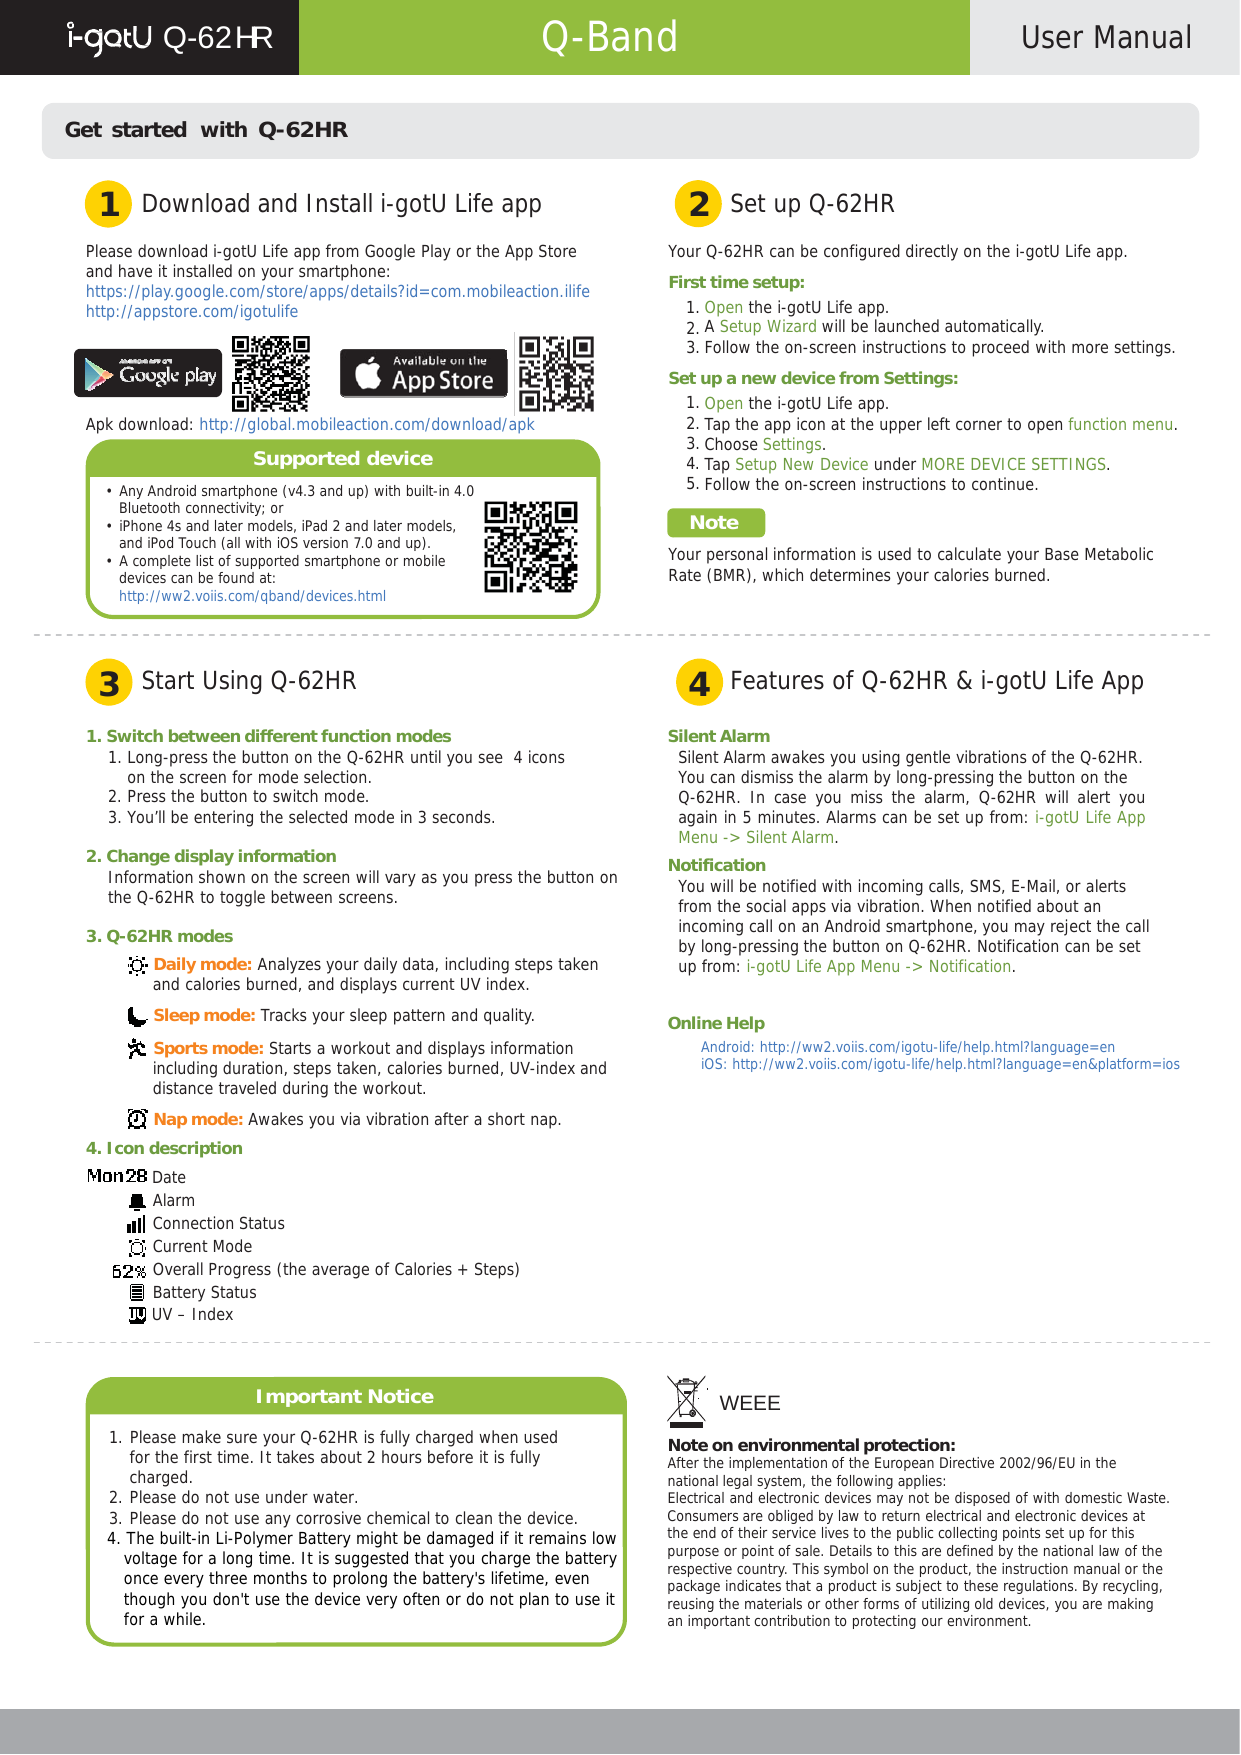      Q-62 HR  Q-Band  User Manual    Get started  with Q-62HR   1  Download and Install i-gotU Life app 2  Set up Q-62HR  Please download i-gotU Life app from Google Play or the App Store and have it installed on your smartphone: https://play.google.com/store/apps/details?id=com.mobileaction.ilife http://appstore.com/igotulife     Apk download: http://global.mobileaction.com/download/apk  Supported device  • Any Android smartphone (v4.3 and up) with built-in 4.0 Bluetooth connectivity; or • iPhone 4s and later models, iPad 2 and later models, and iPod Touch (all with iOS version 7.0 and up). • A complete list of supported smartphone or mobile devices can be found at: http://ww2.voiis.com/qband/devices.html  Your Q-62HR can be configured directly on the i-gotU Life app.  First time setup: 1. Open the i-gotU Life app. 2. A Setup Wizard will be launched automatically. 3. Follow the on-screen instructions to proceed with more settings.  Set up a new device from Settings: 1. Open the i-gotU Life app. 2. Tap the app icon at the upper left corner to open function menu. 3. Choose Settings. 4. Tap Setup New Device under MORE DEVICE SETTINGS. 5. Follow the on-screen instructions to continue.  Note  Your personal information is used to calculate your Base Metabolic Rate (BMR), which determines your calories burned.    3  Start Using Q-62HR 4  Features of Q-62HR &amp; i-gotU Life App  1. Switch between different function modes 1. Long-press the button on the Q-62HR until you see  4 icons on the screen for mode selection. 2. Press the button to switch mode. 3. You’ll be entering the selected mode in 3 seconds.  2. Change display information Information shown on the screen will vary as you press the button on the Q-62HR to toggle between screens.  3. Q-62HR modes  Daily mode: Analyzes your daily data, including steps taken and calories burned, and displays current UV index.  Sleep mode: Tracks your sleep pattern and quality.   Sports mode: Starts a workout and displays information including duration, steps taken, calories burned, UV-index and distance traveled during the workout.  Nap mode: Awakes you via vibration after a short nap. 4. Icon description  Date Alarm Connection Status Current Mode Overall Progress (the average of Calories + Steps) Battery Status  UV – Index    Important Notice  1. Please make sure your Q-62HR is fully charged when used for the first time. It takes about 2 hours before it is fully charged. 2. Please do not use under water. 3. Please do not use any corrosive chemical to clean the device. 4. The built-in Li-Polymer Battery might be damaged if it remains low voltage for a long time. It is suggested that you charge the battery once every three months to prolong the battery&apos;s lifetime, even though you don&apos;t use the device very often or do not plan to use it for a while.  Silent Alarm Silent Alarm awakes you using gentle vibrations of the Q-62HR. You can dismiss the alarm by long-pressing the button on the Q-62HR. In case you miss the alarm, Q-62HR will alert you again in 5 minutes. Alarms can be set up from: i-gotU Life App Menu -&gt; Silent Alarm. Notification You will be notified with incoming calls, SMS, E-Mail, or alerts from the social apps via vibration. When notified about an incoming call on an Android smartphone, you may reject the call by long-pressing the button on Q-62HR. Notification can be set up from: i-gotU Life App Menu -&gt; Notification.  Online Help Android: http://ww2.voiis.com/igotu-life/help.html?language=en iOS: http://ww2.voiis.com/igotu-life/help.html?language=en&amp;platform=ios                WEEE  Note on environmental protection: After the implementation of the European Directive 2002/96/EU in the national legal system, the following applies: Electrical and electronic devices may not be disposed of with domestic Waste. Consumers are obliged by law to return electrical and electronic devices at the end of their service lives to the public collecting points set up for this purpose or point of sale. Details to this are defined by the national law of the respective country. This symbol on the product, the instruction manual or the package indicates that a product is subject to these regulations. By recycling, reusing the materials or other forms of utilizing old devices, you are making an important contribution to protecting our environment.